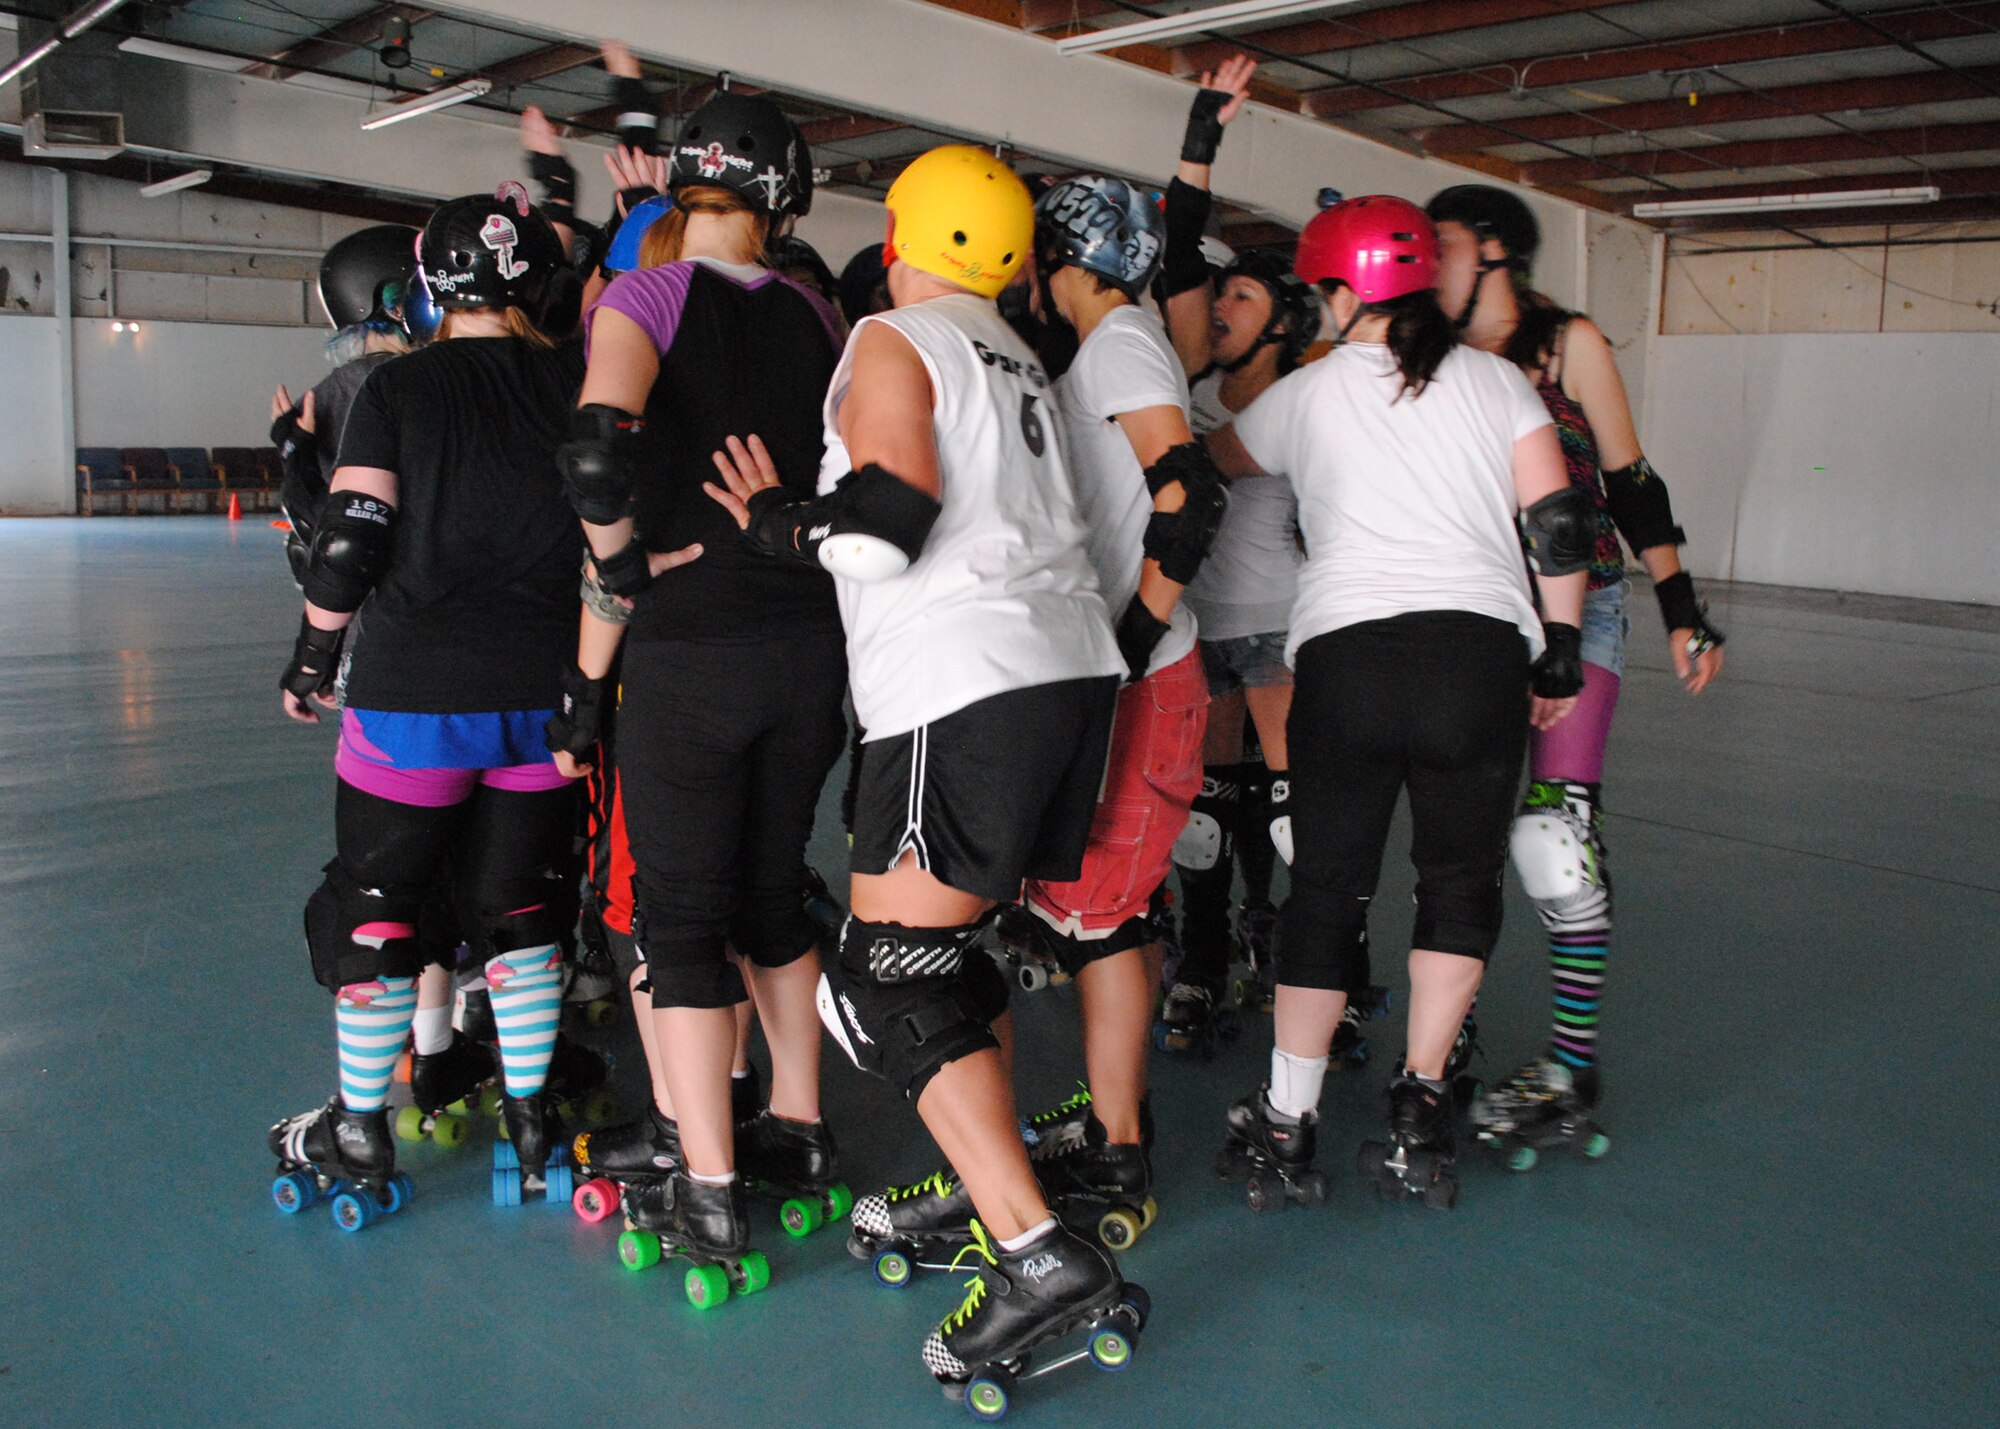 Members of the Great Falls Electric City Roller GrrrlZ team put their hands together and pump each other up with words of encouragement at the end of practice. (U.S. Air Force photo/Airman 1st Class Katrina Heikkinen)